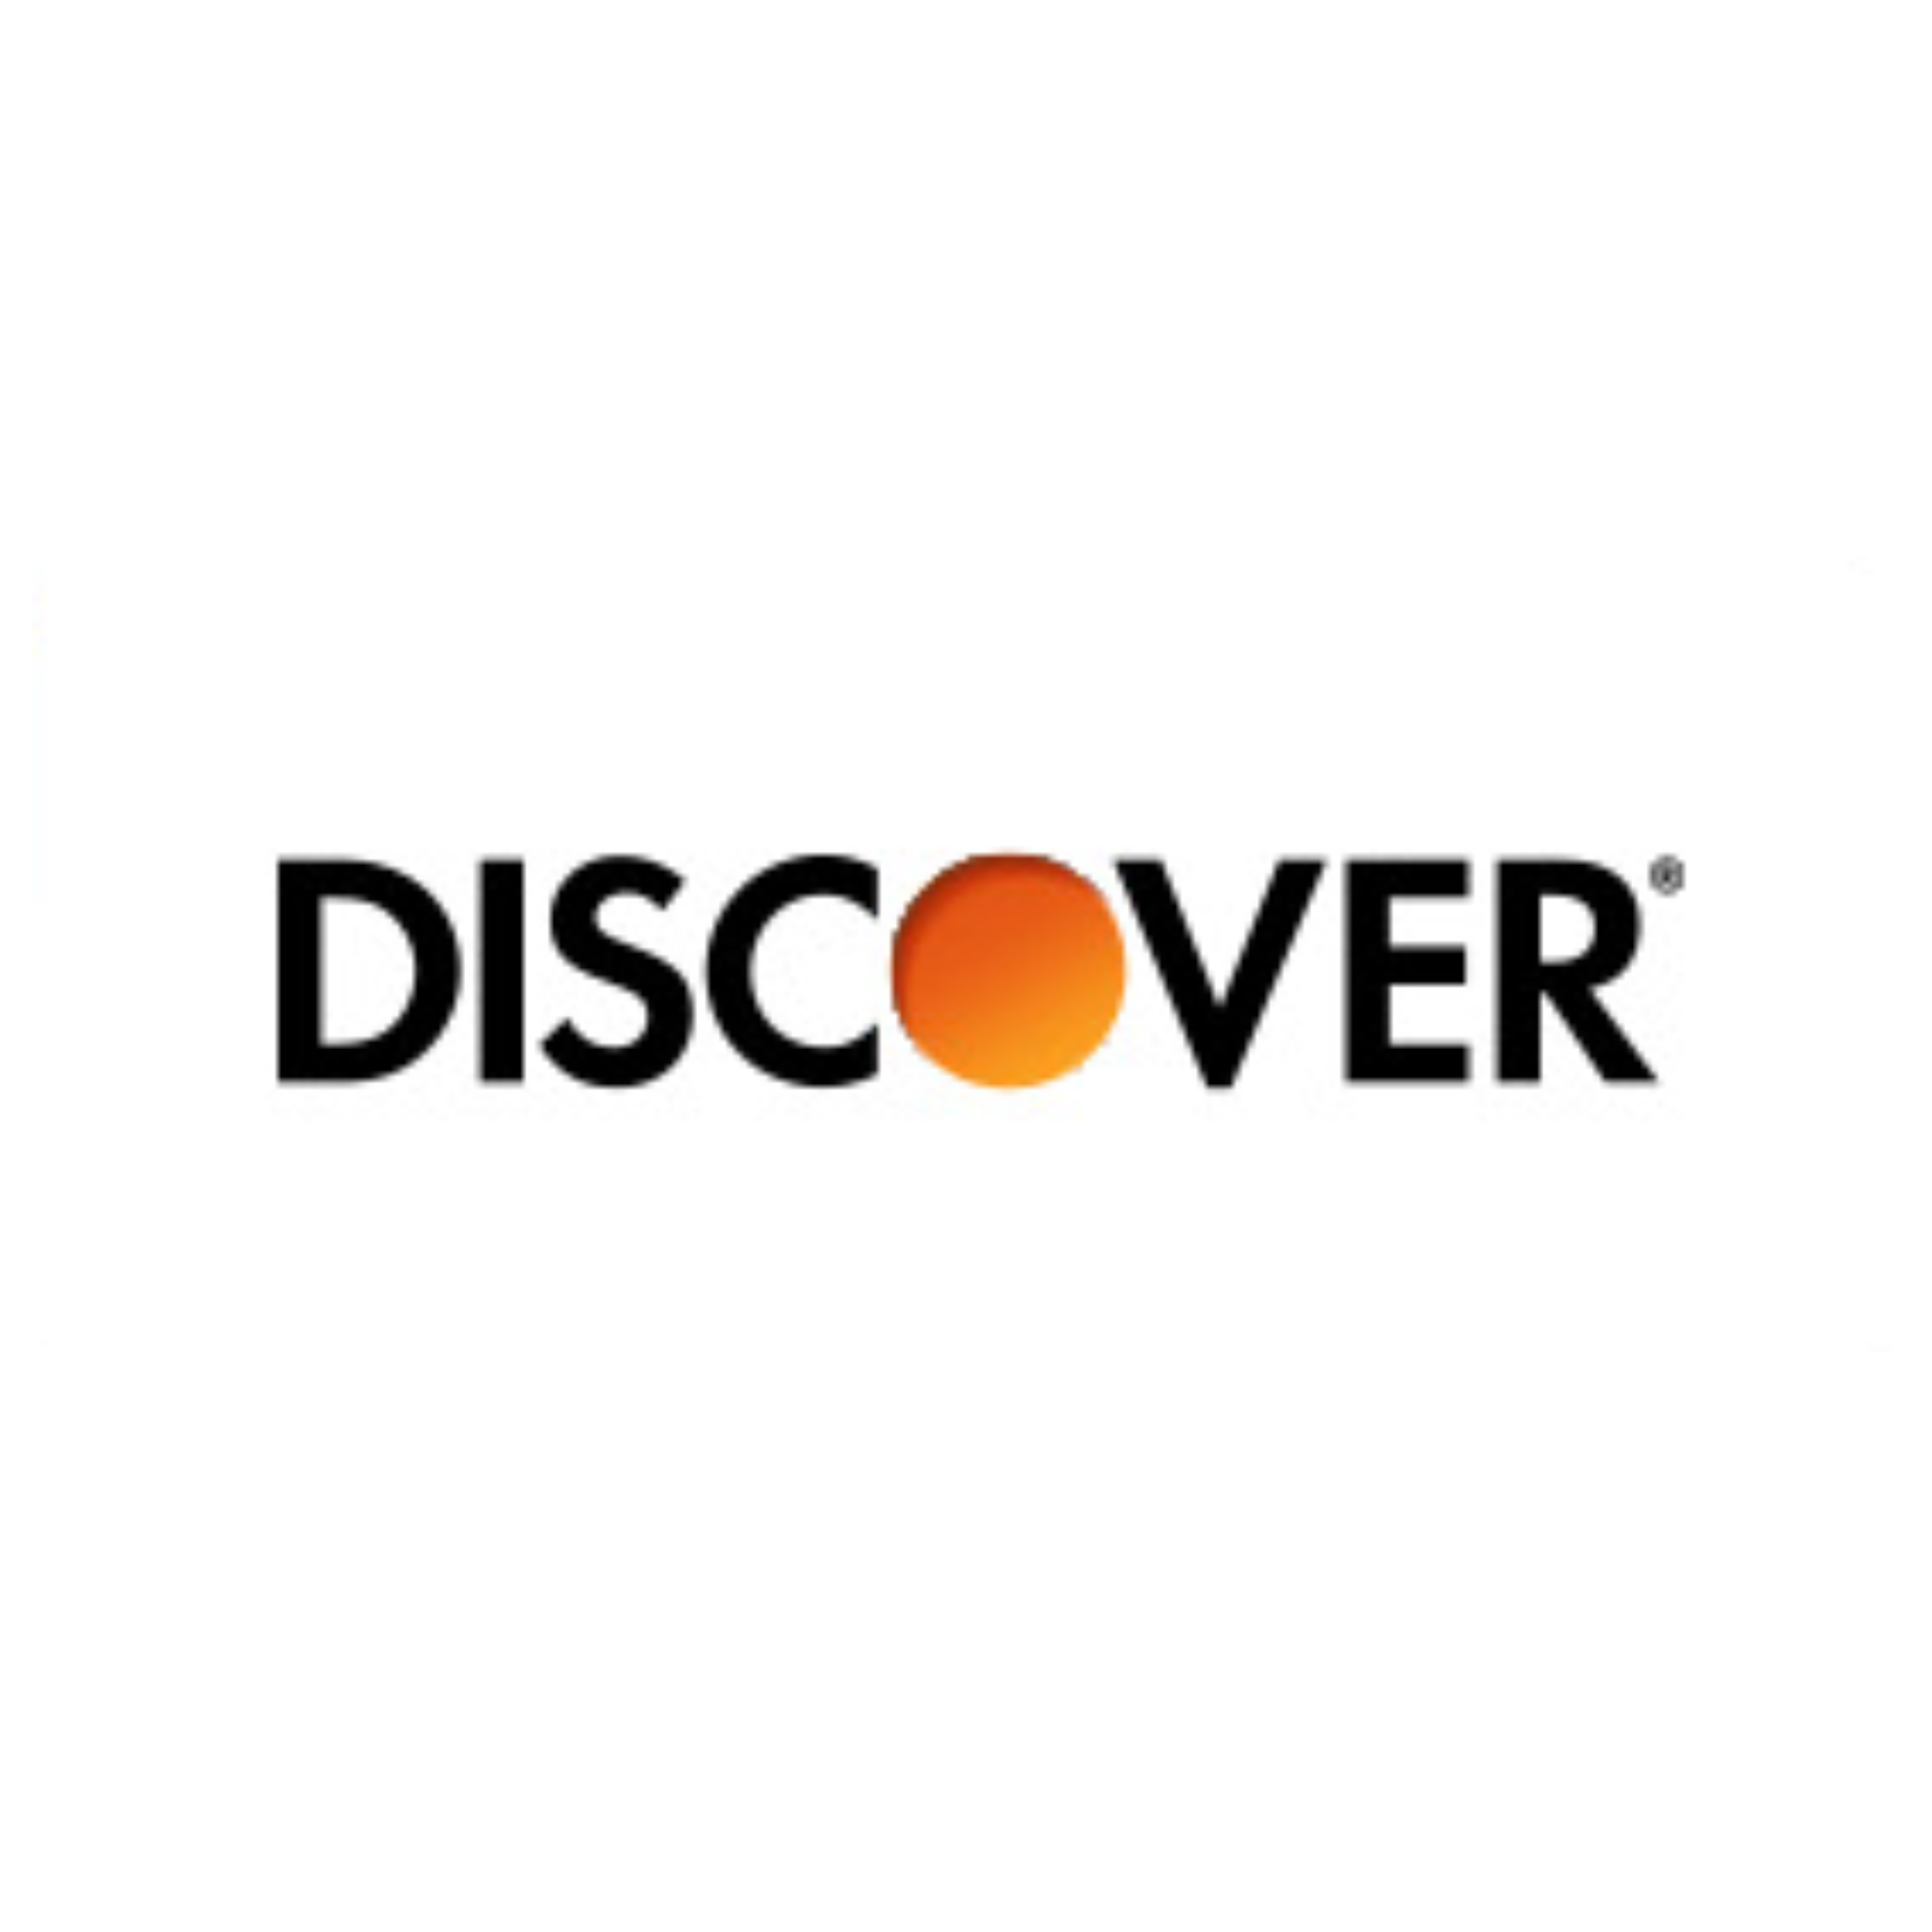 Select Amazon Accounts: Add Discover Card as Payment Method, Get